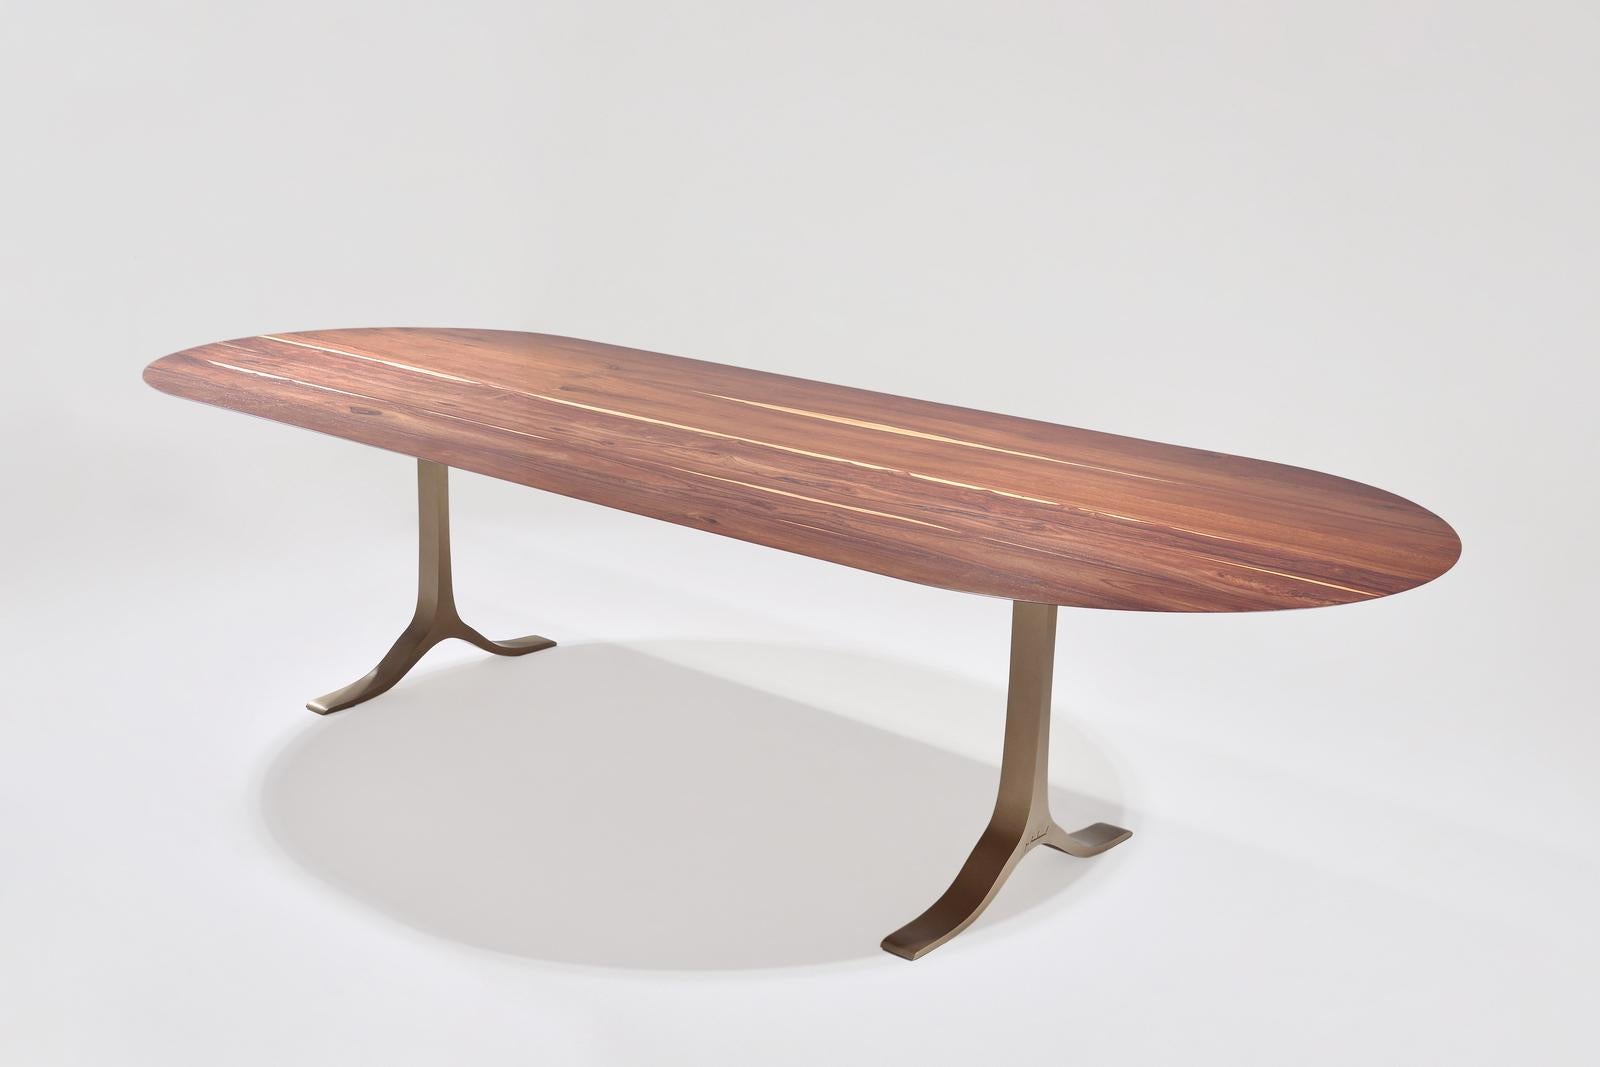 The English oval dining table was crafted from reclaimed Ching Chan wood, a rare rosewood family we sourced from an old house near the ancient Thai capital of Ayutthaya (P. Tendercool is based in Thailand). Traditionally Ching Chan wood are use in